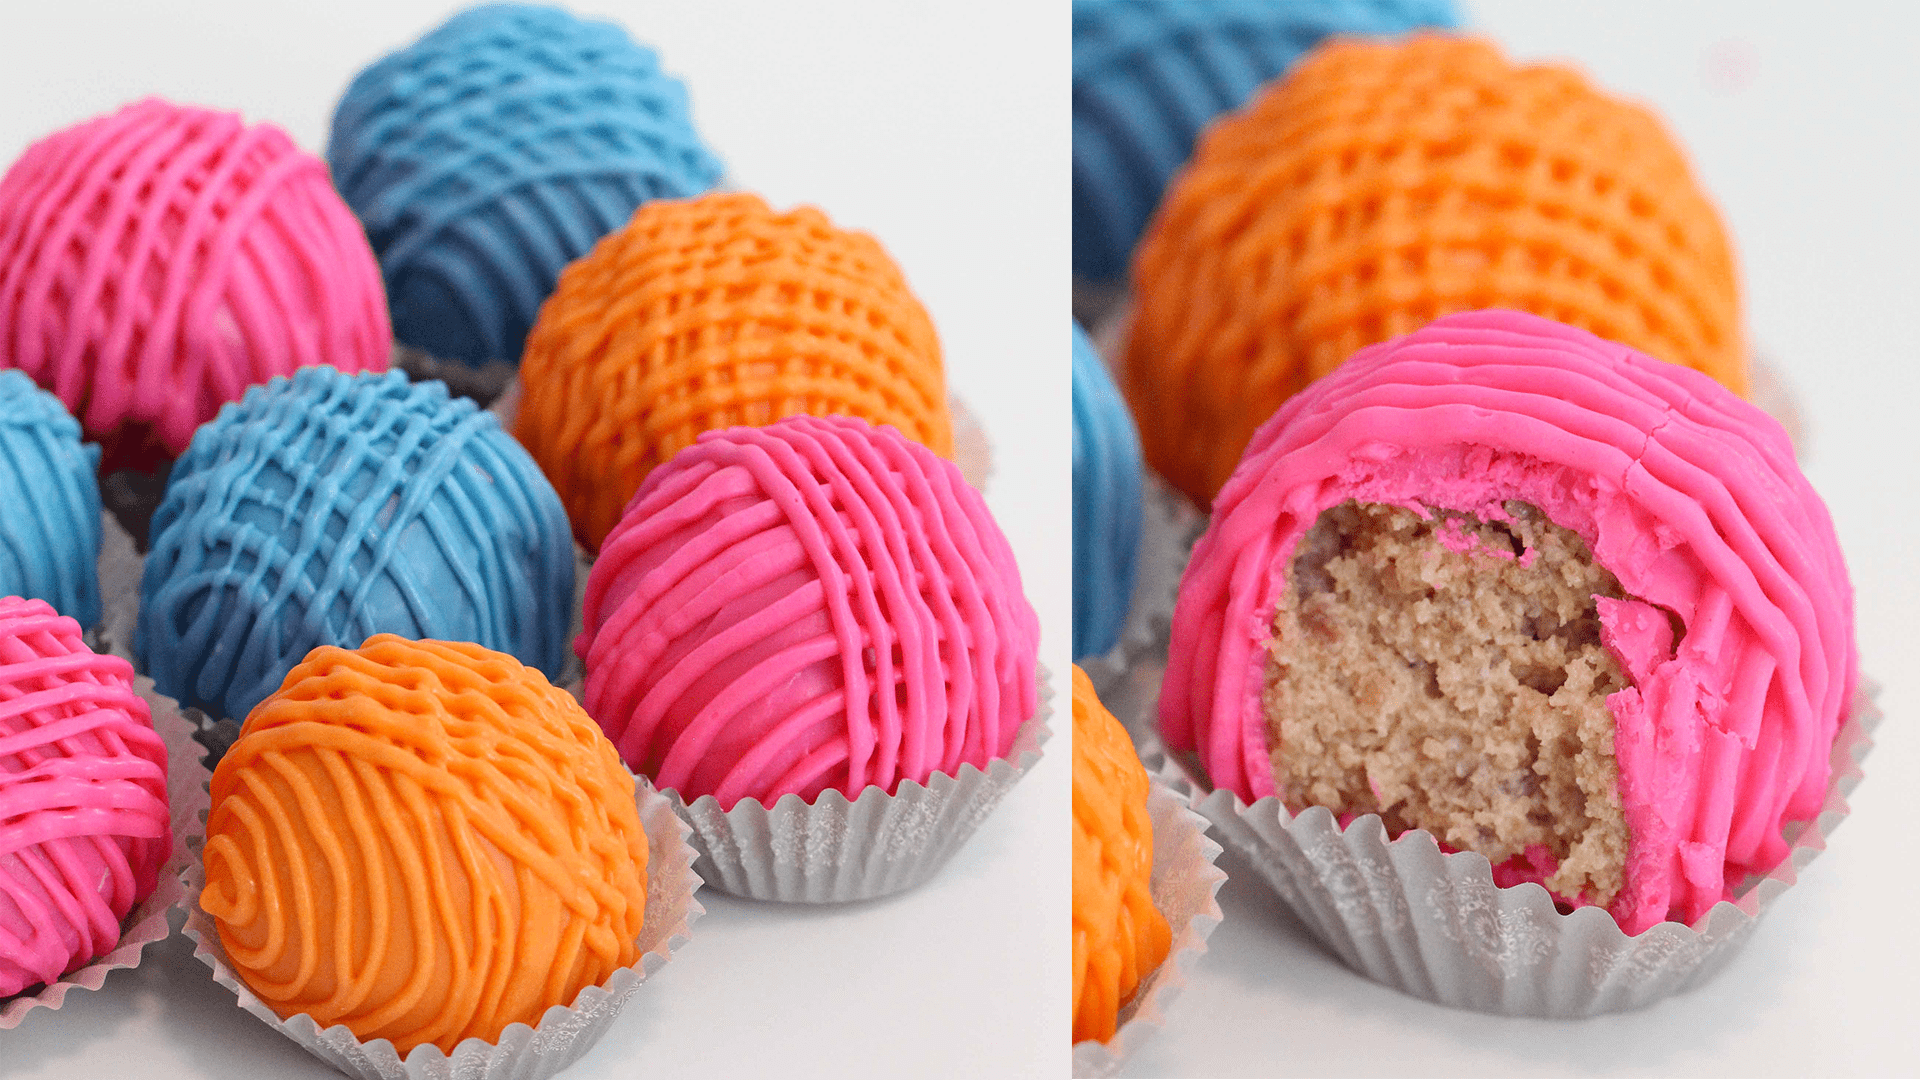 12 Yarn Ball Types and How to Knit with Them - Interweave